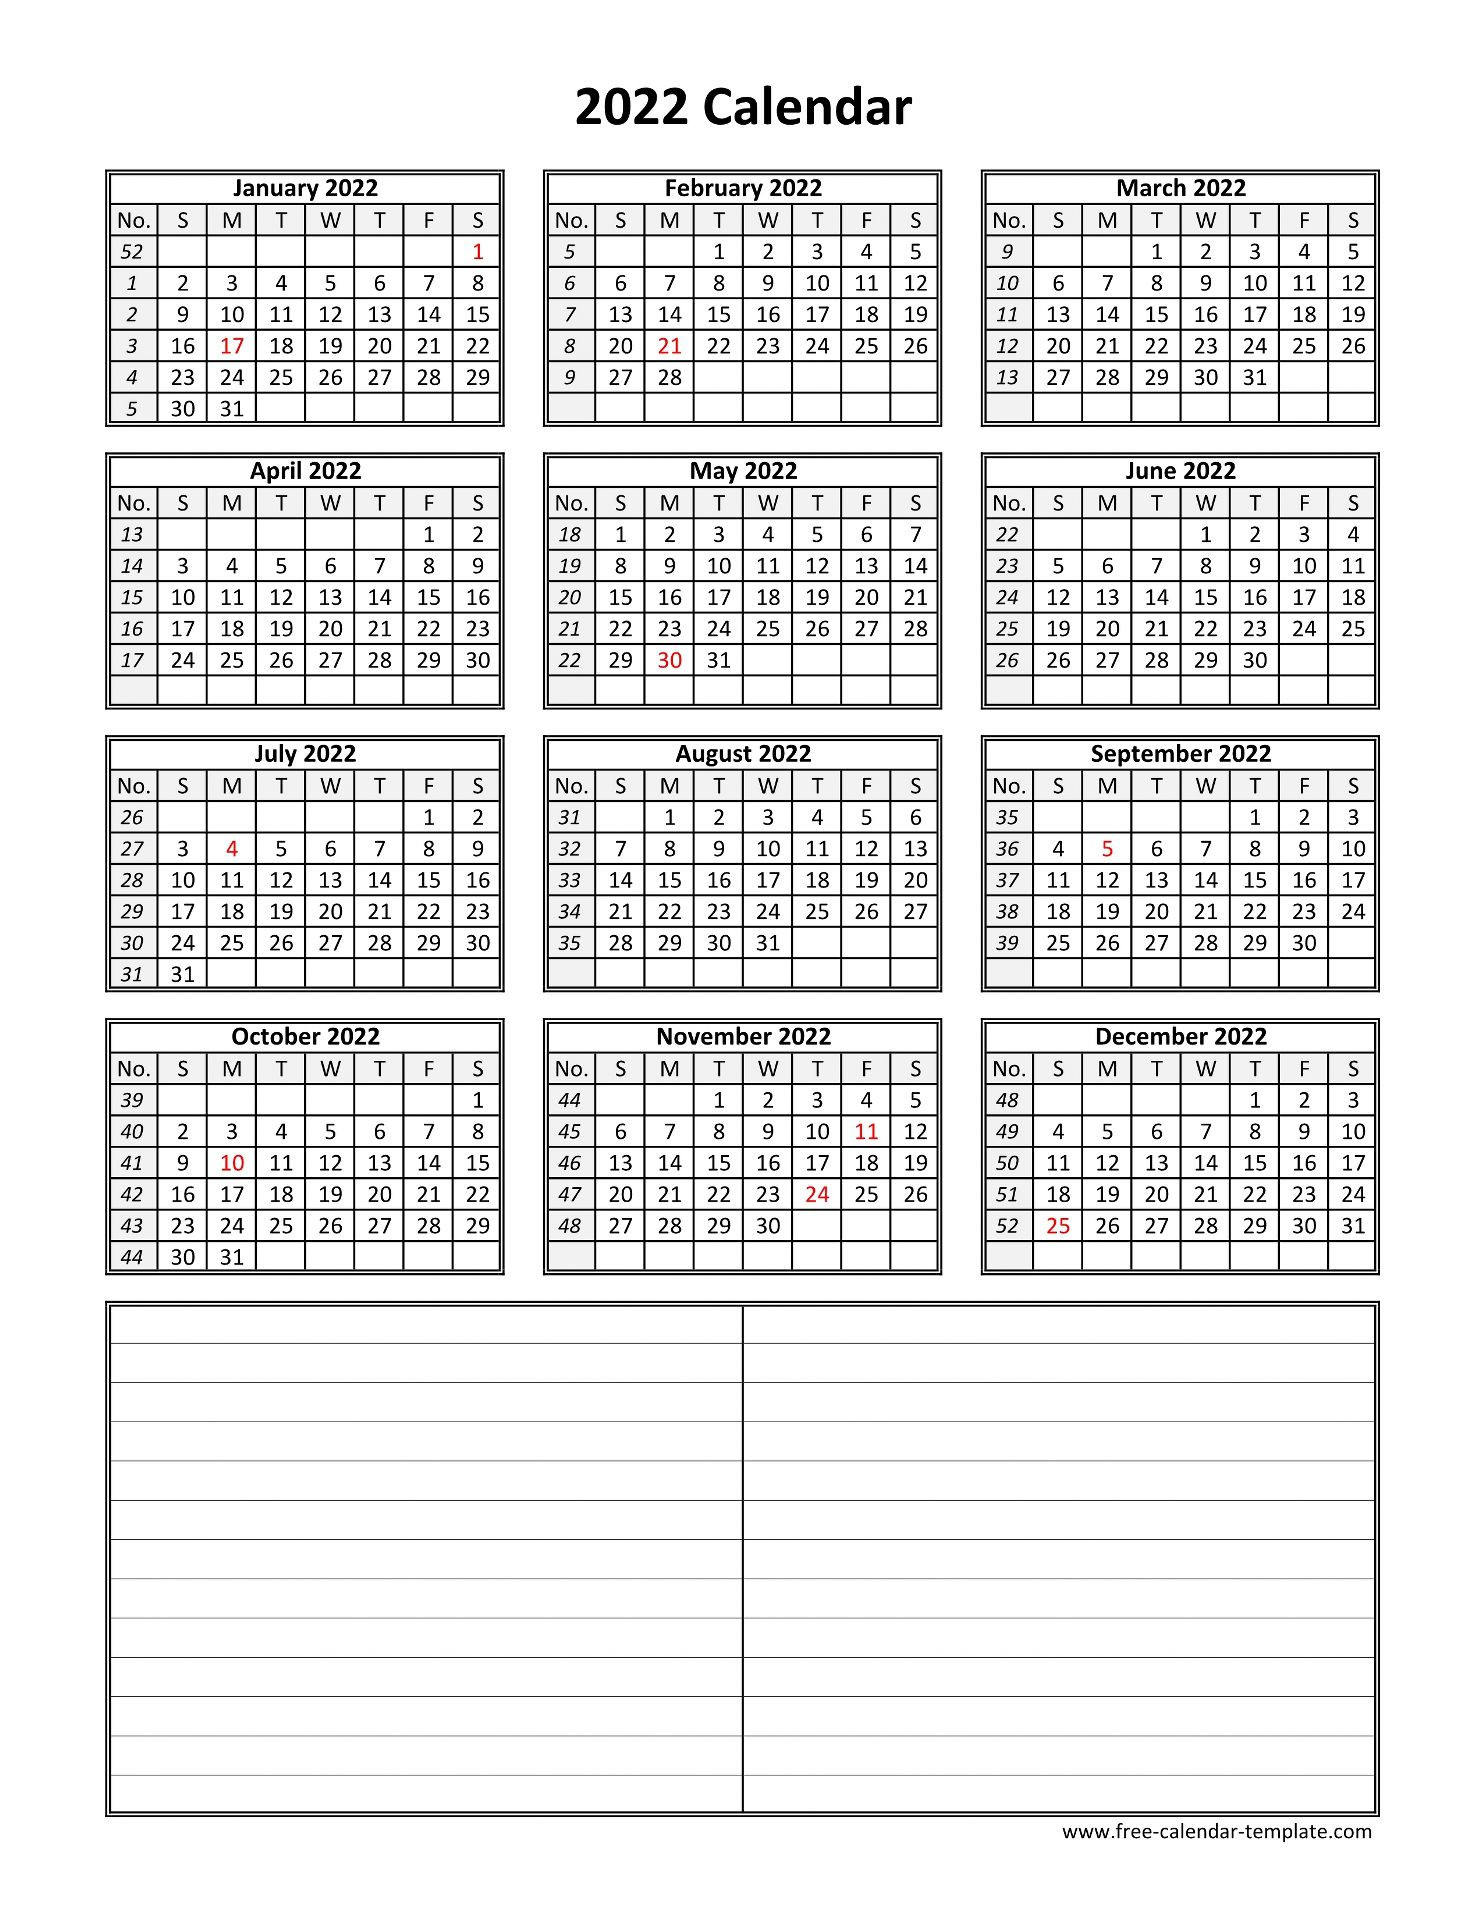 Download Calendar 2022 Docx Images - All In Here  Free Printable Calendar 2022 Plants